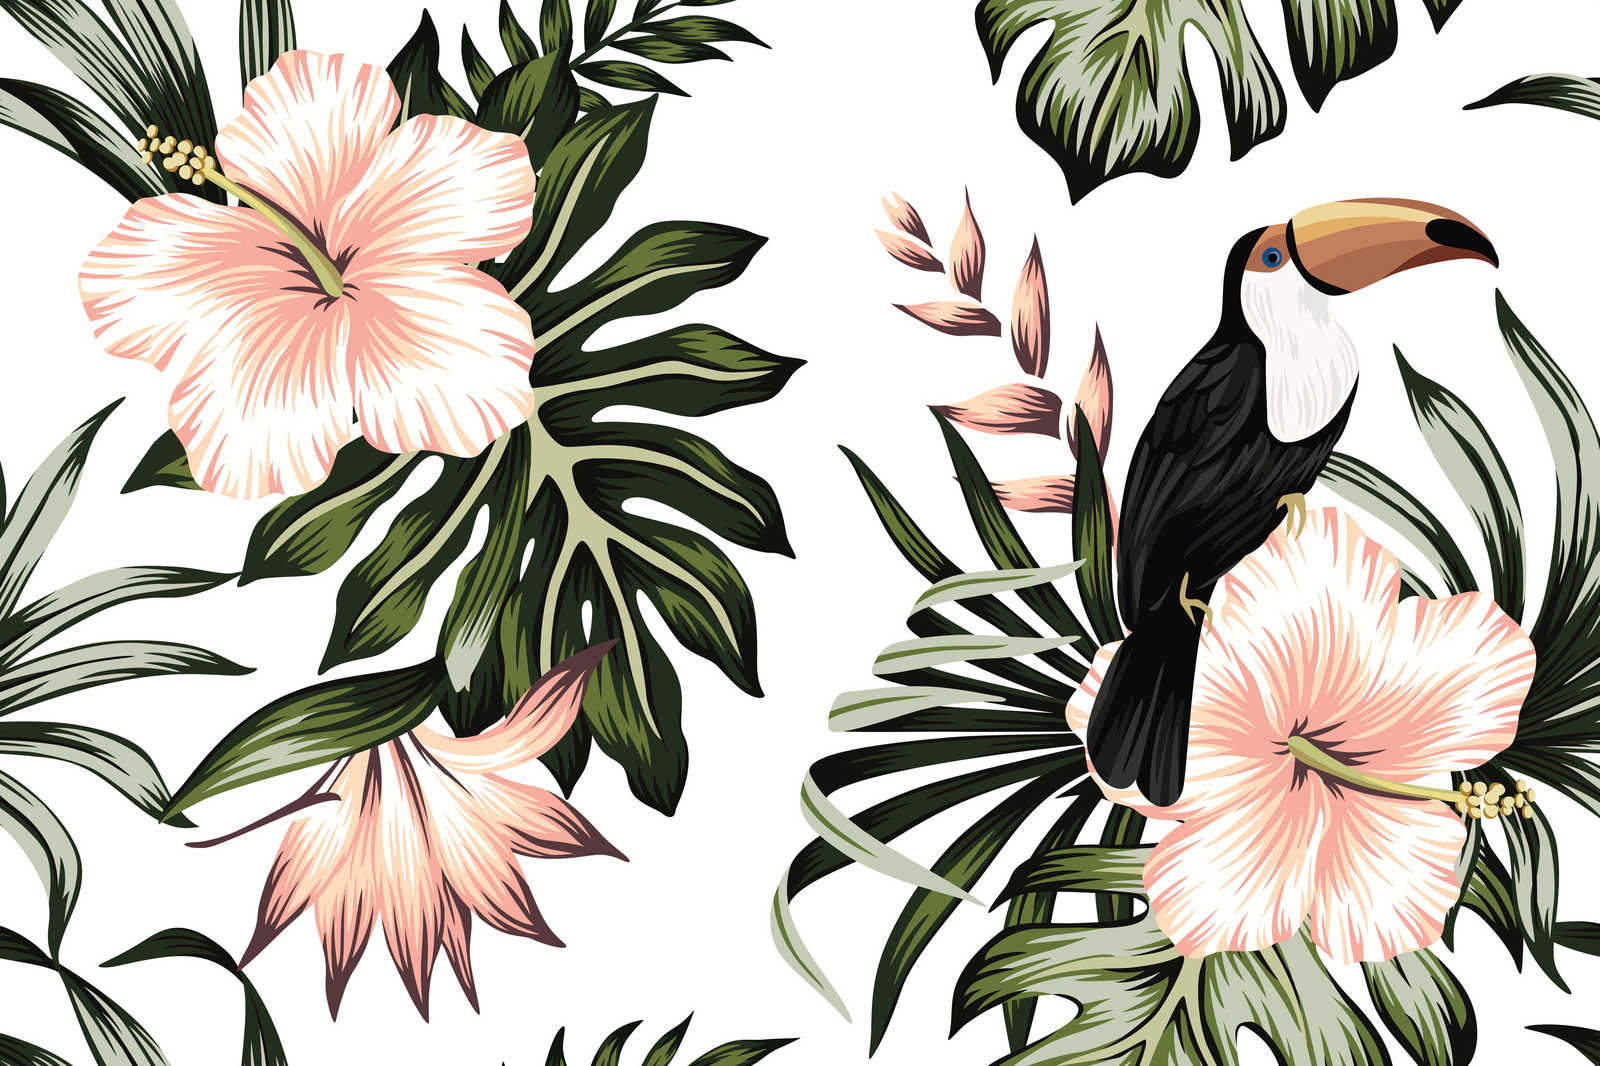             Canvas with Jungle Plants and Pelican | White, Pink, Green - 0.90 m x 0.60 m
        